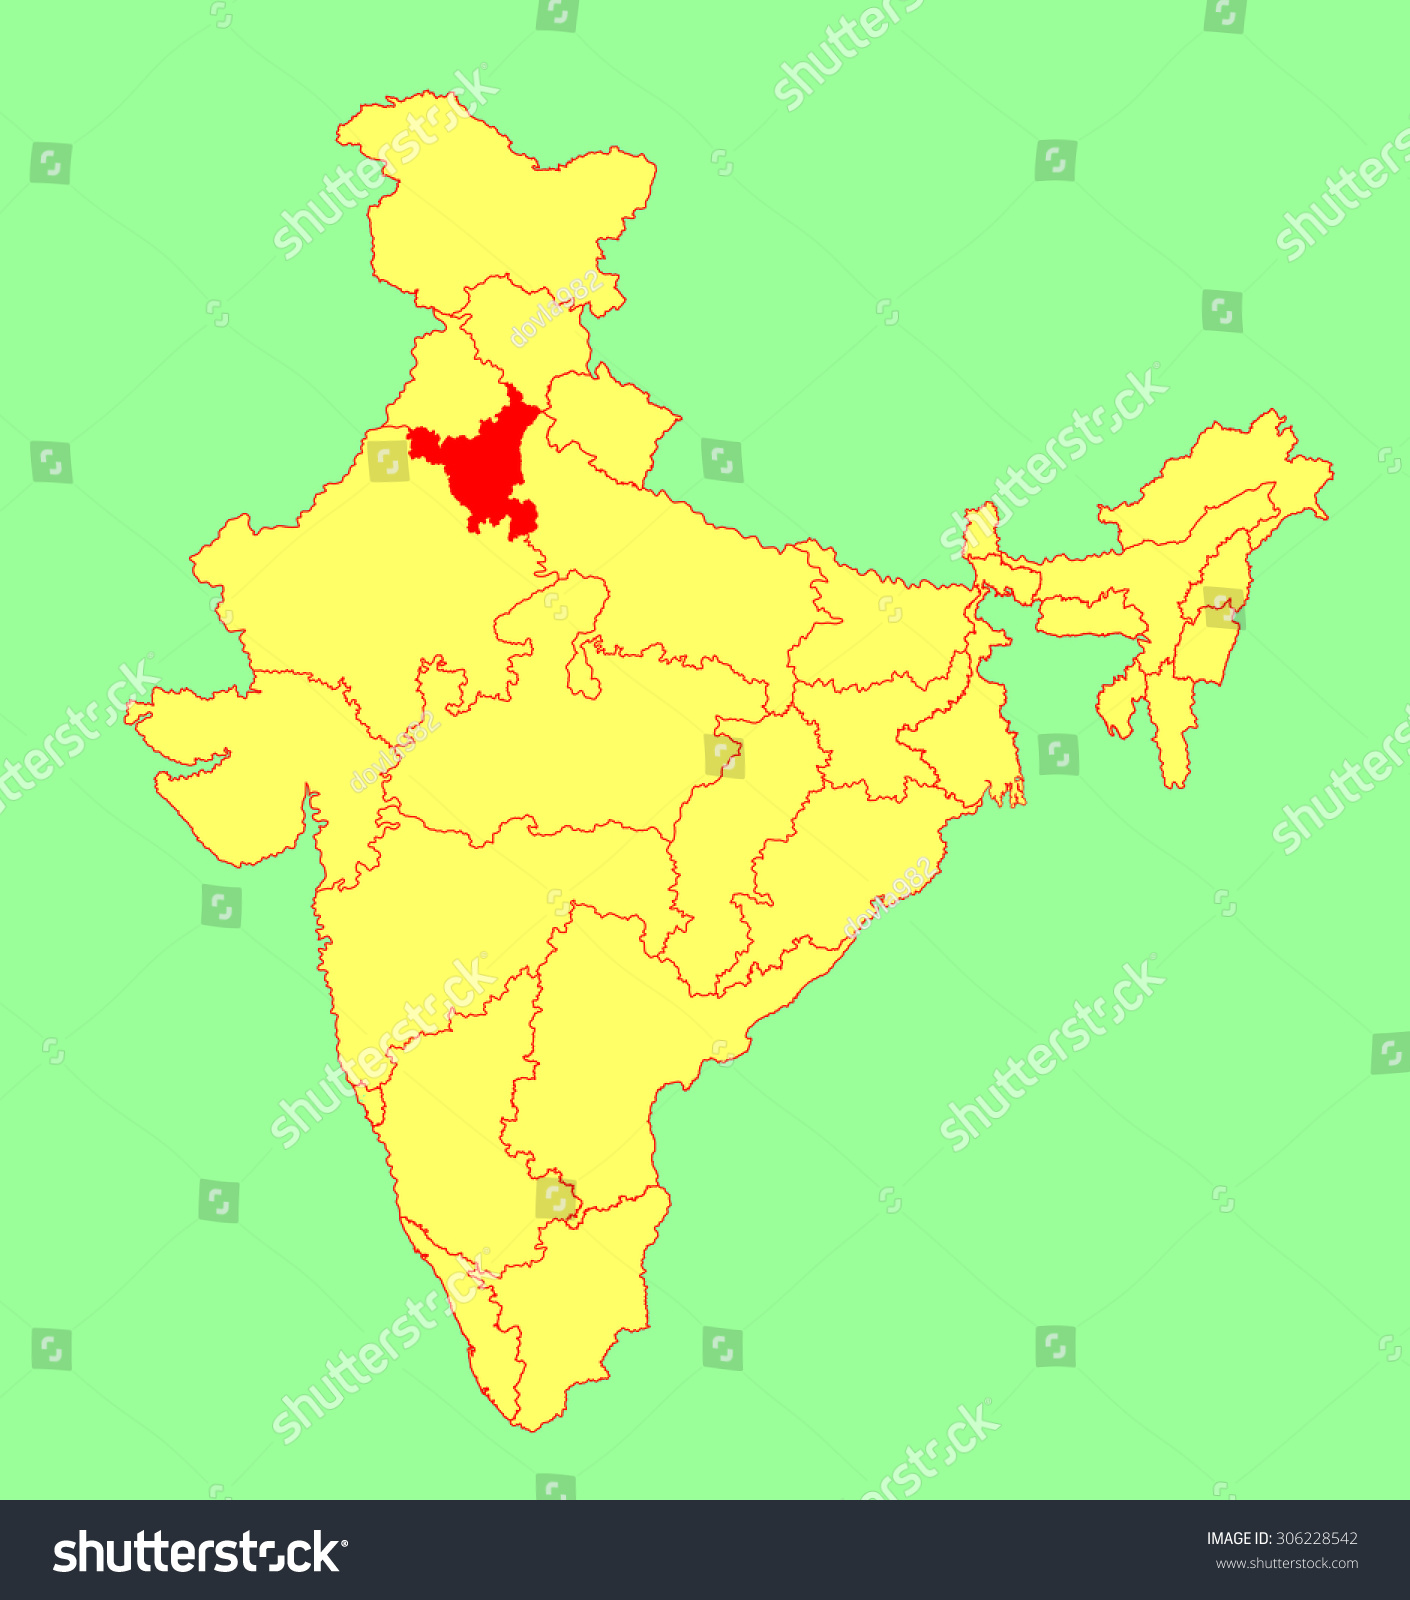 Haryana In India Map Haryana State India Vector Map Silhouette Stock Vector (Royalty Free)  306228542 | Shutterstock